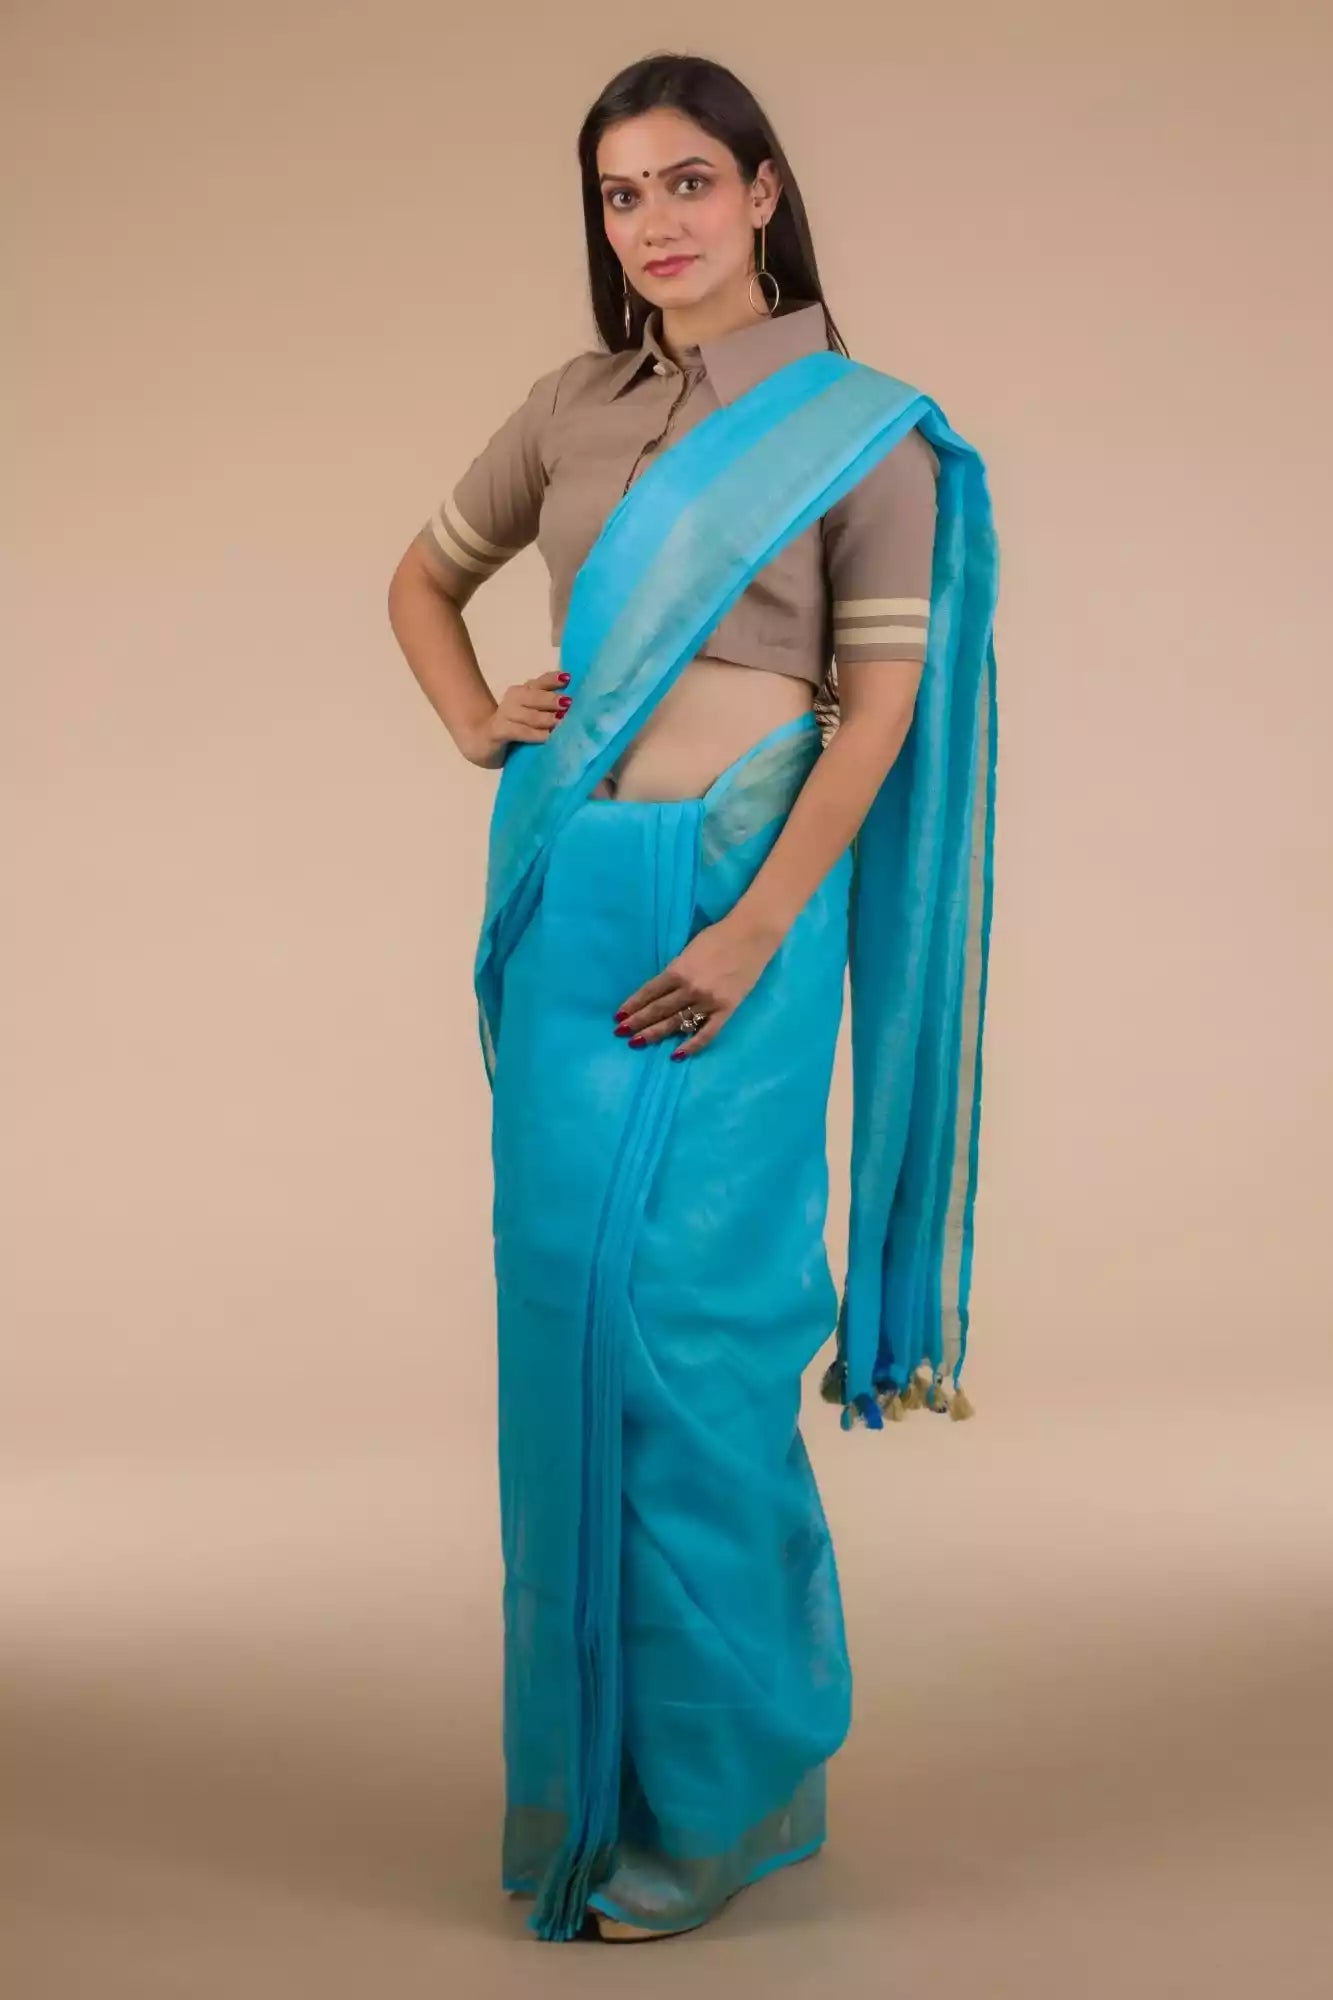 a woman wearing a cyan saree with brown blouse, holding her saree pleats with one hand